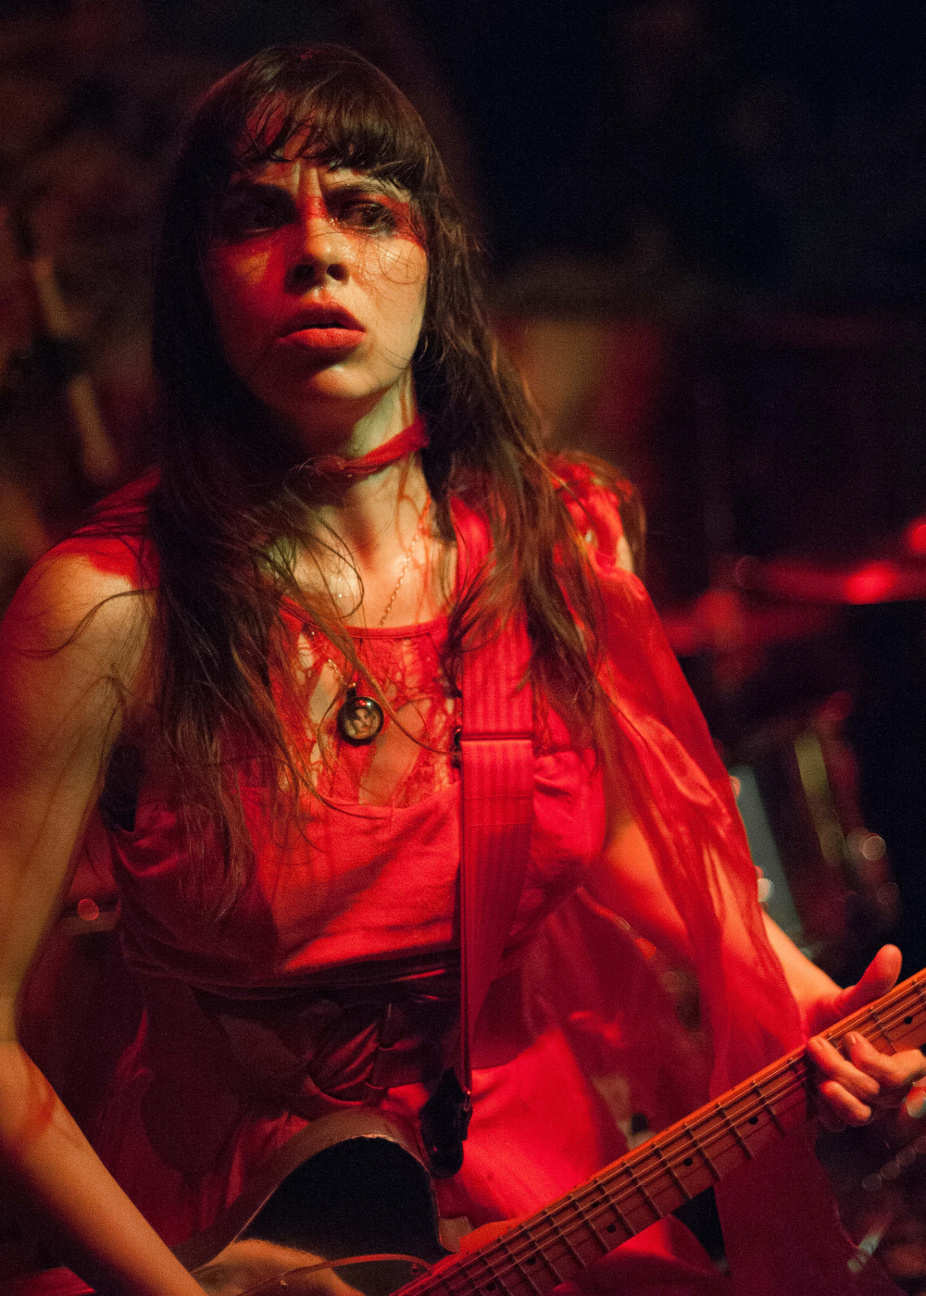 images/Le Butcherettes at Pappy and Harriets/Red Dress